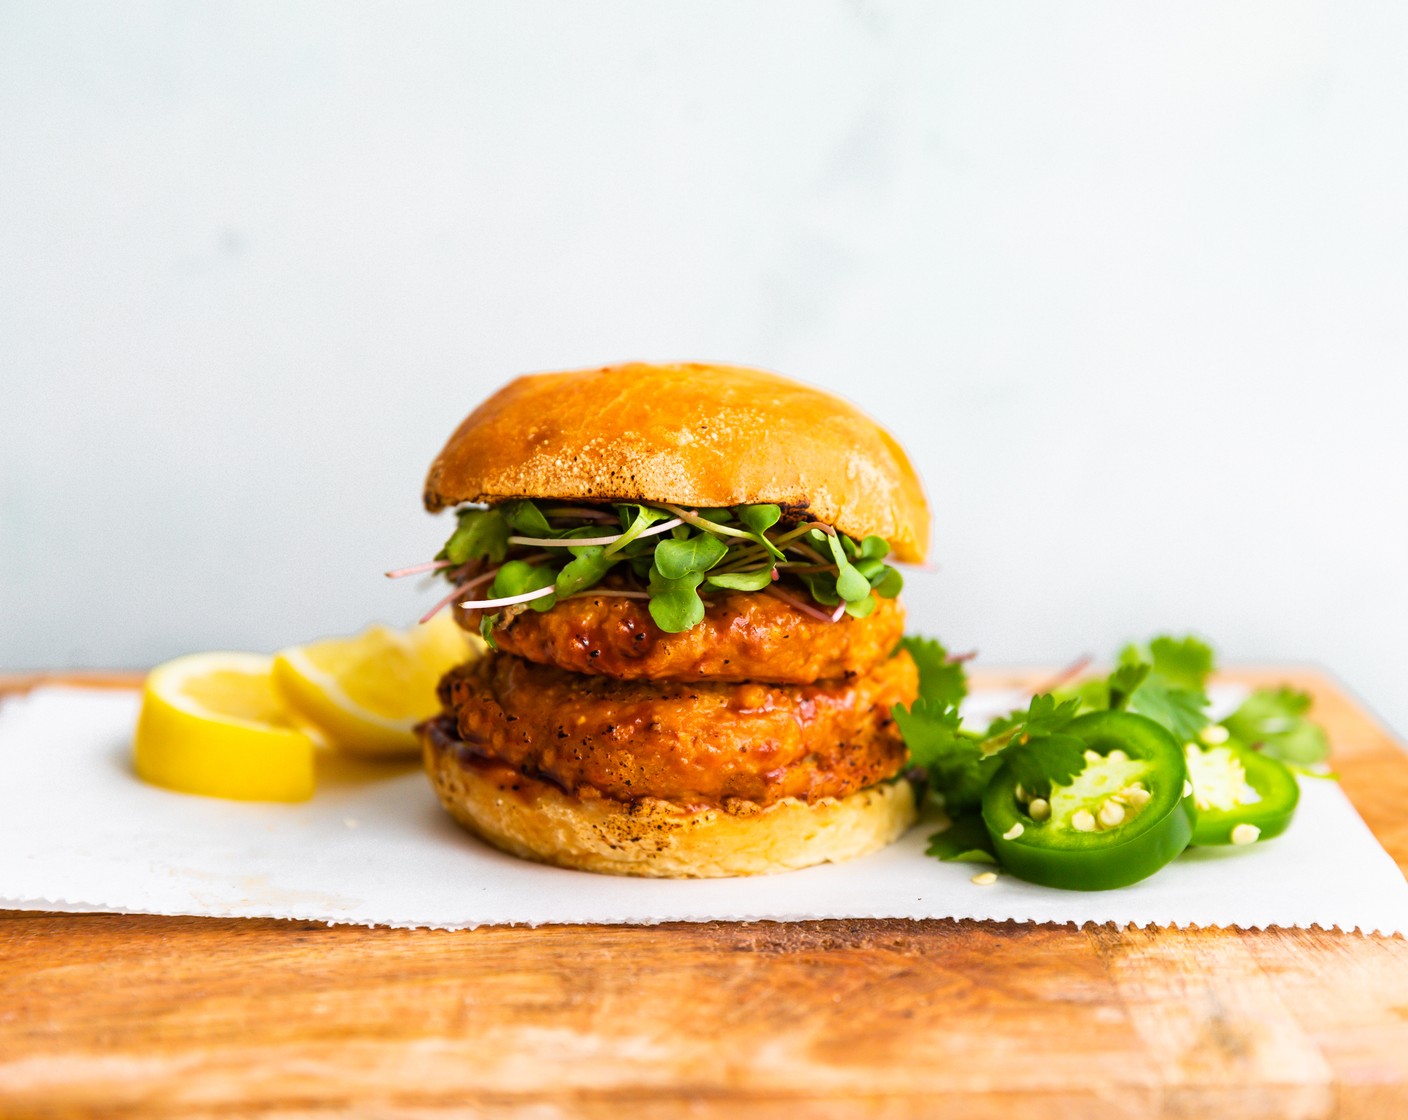 step 6 Serve between toasted gluten free buns as a salmon burger or forgo the buns and plate with cooked vegetables and your favorite dipping sauce for the baked salmon cake option.